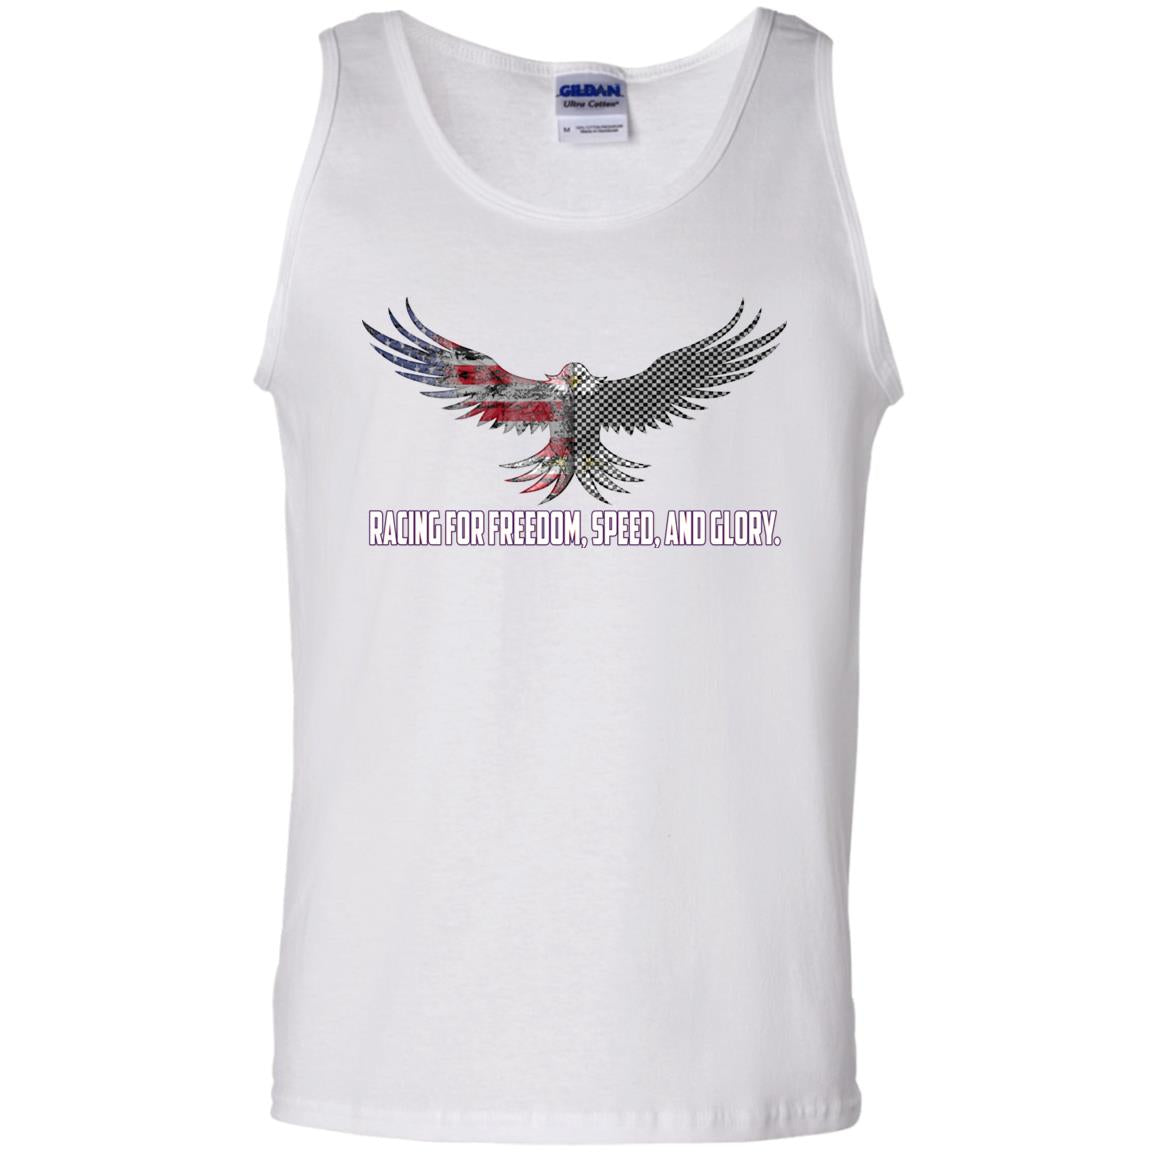 Racing For Freedom, Speed, And Glory 100% Cotton Tank Top